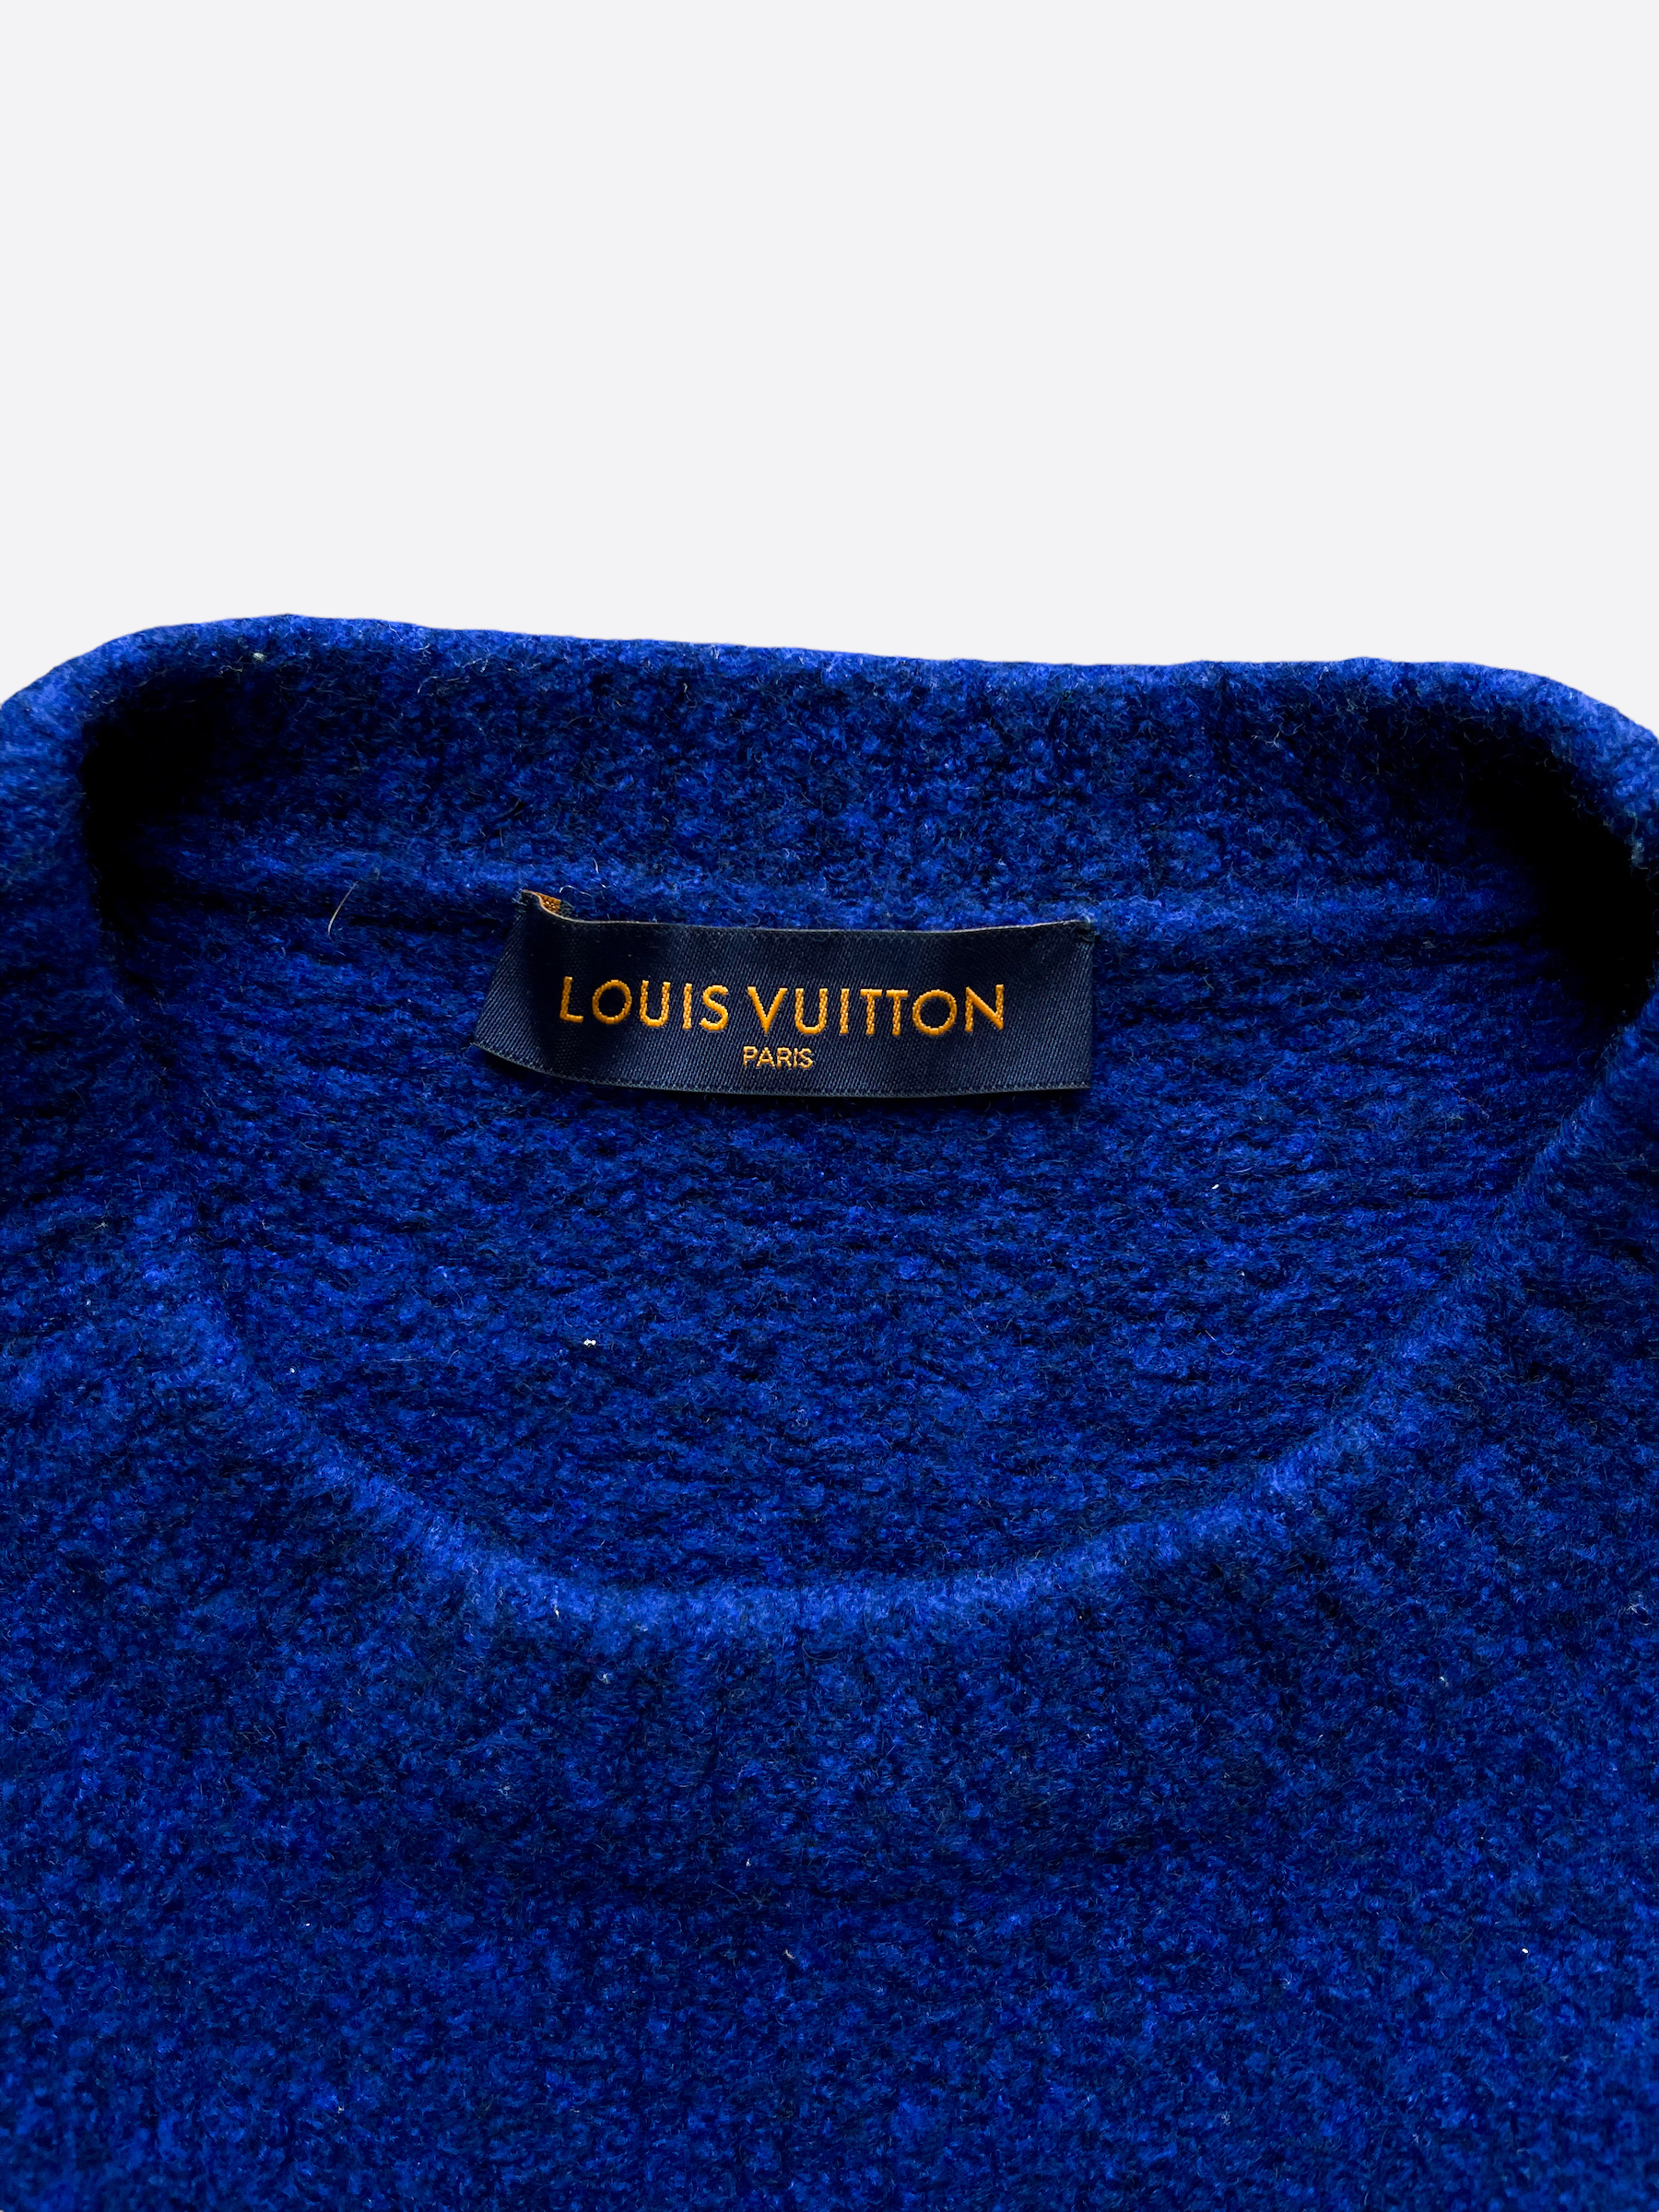 BEST Louis Vuitton Blue Luxury Brand Hoodie Pants Limited Edition